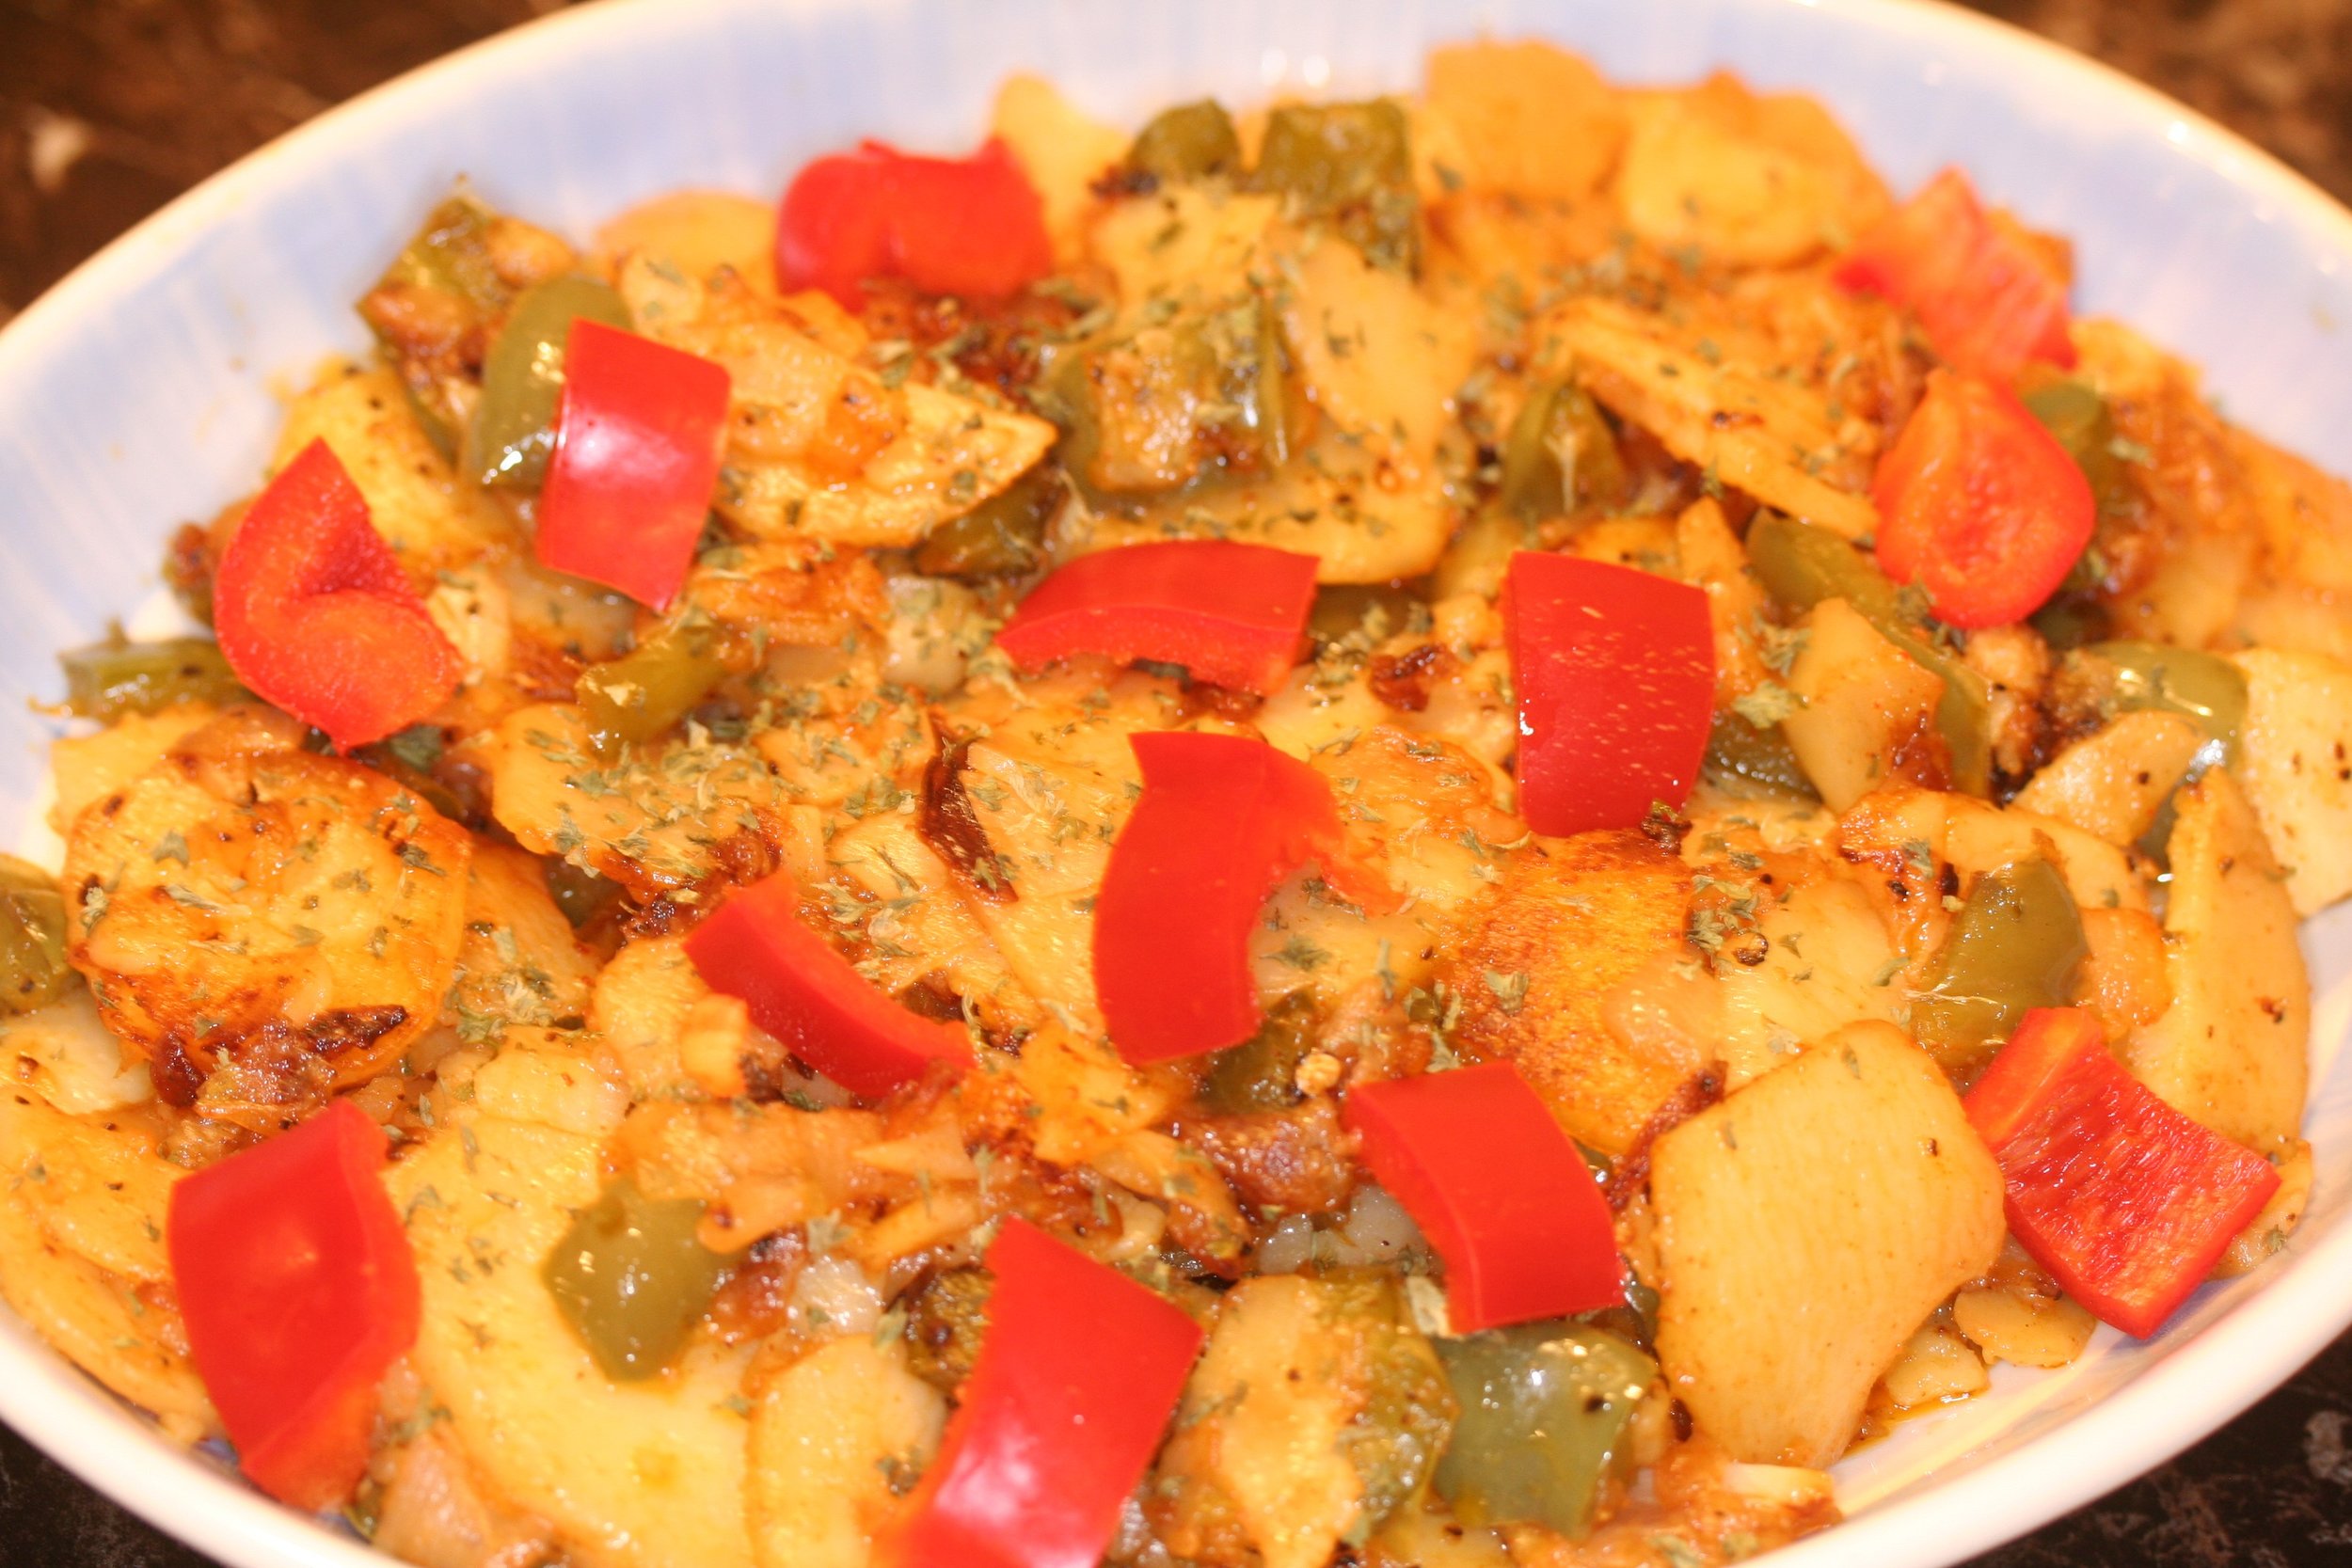 Caribbean style home fries